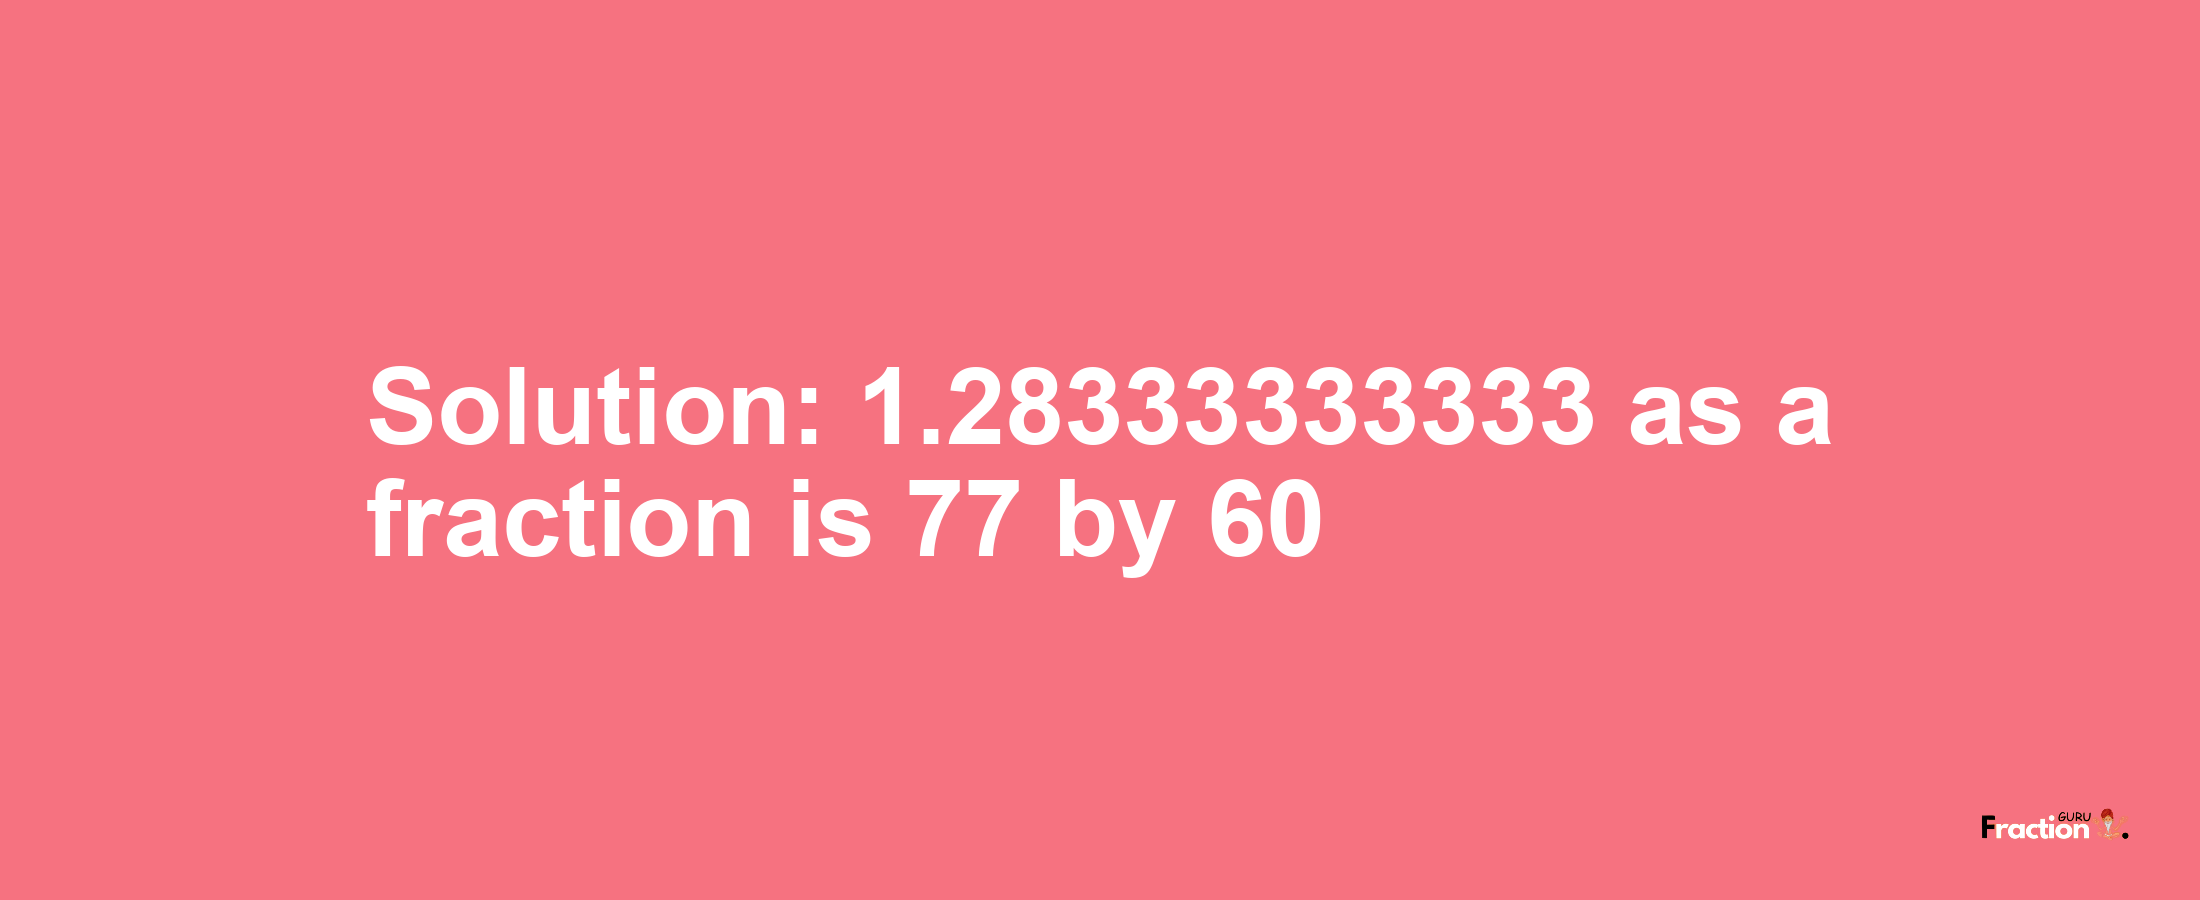 Solution:1.28333333333 as a fraction is 77/60